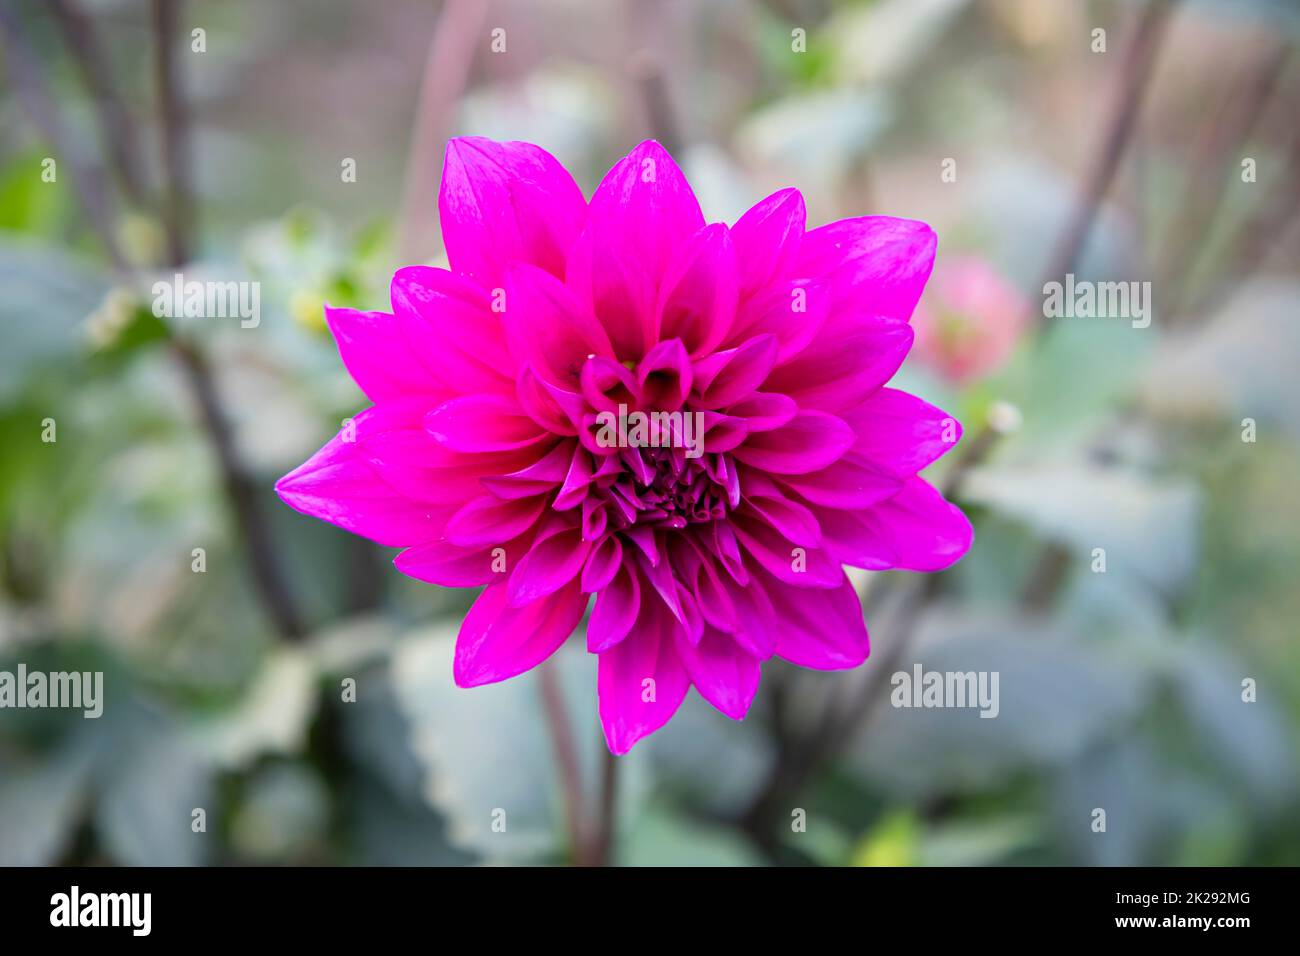 Beautiful Pink Blooming Dahlia Flower in the Garden Tree. Stock Photo